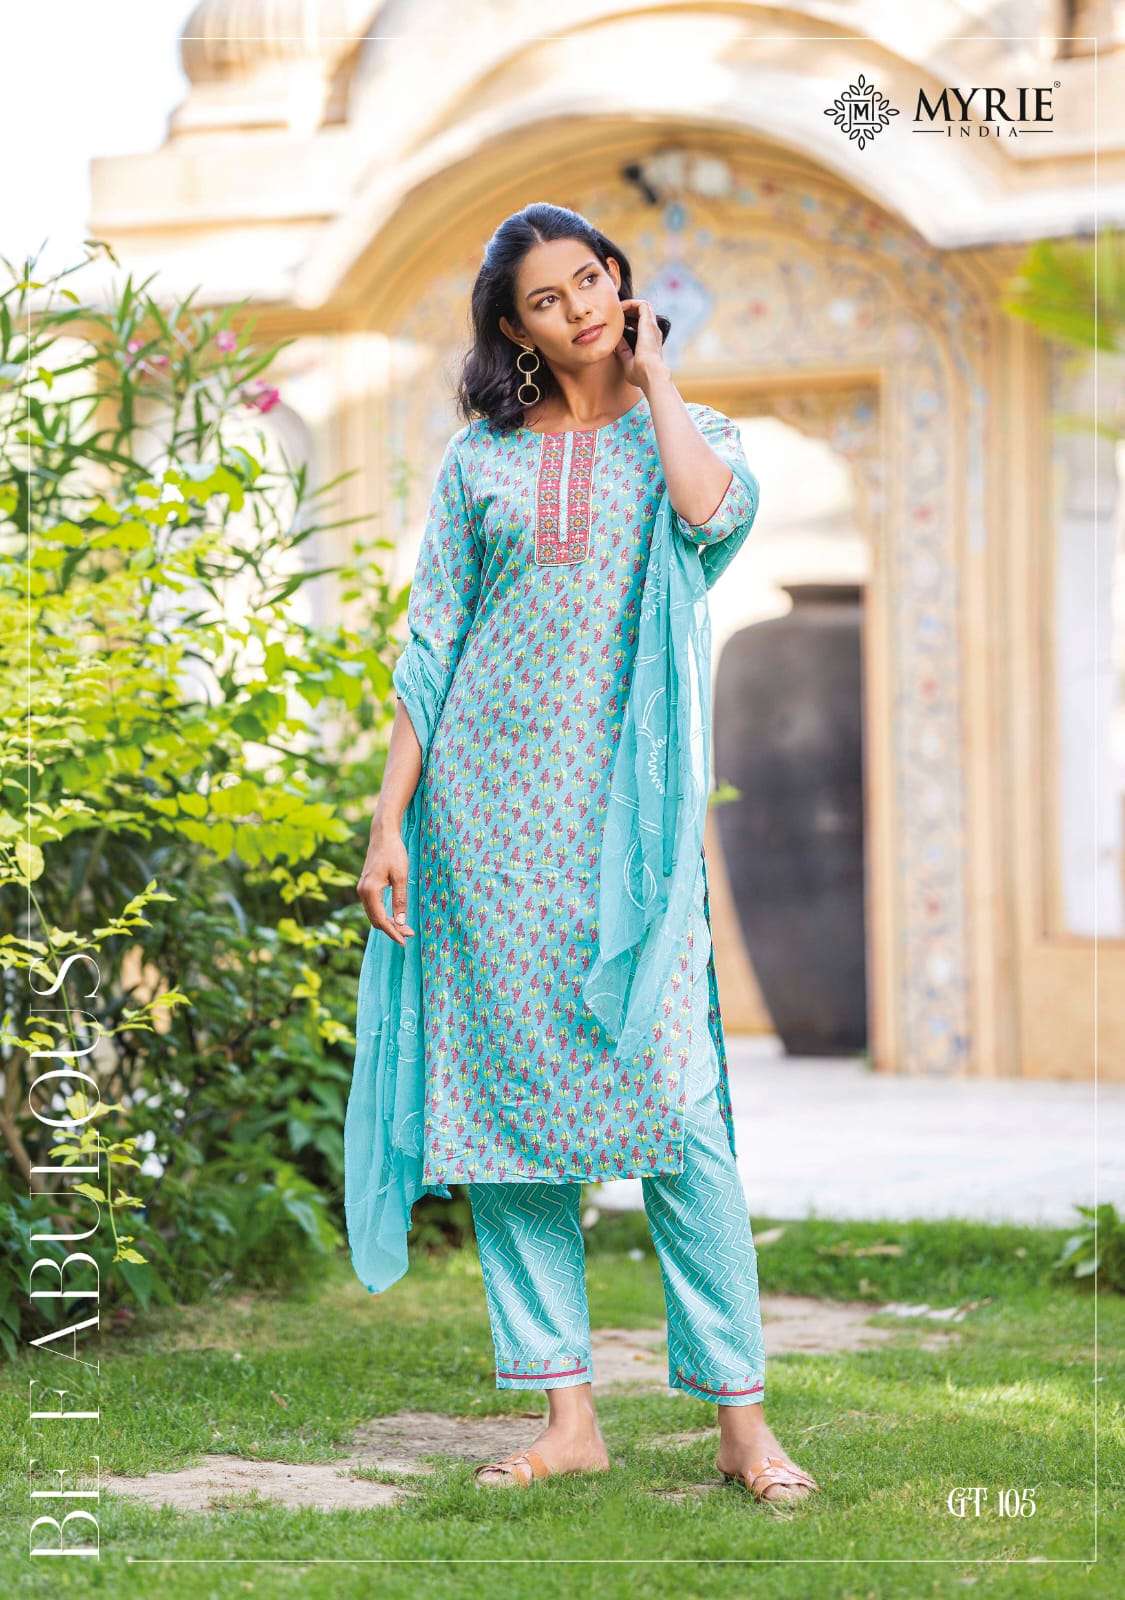 Golden Tree By Myrie 101 To 108 Series Beautiful Suits Colorful Stylish Fancy Casual Wear & Ethnic Wear Capsule Print Dresses At Wholesale Price